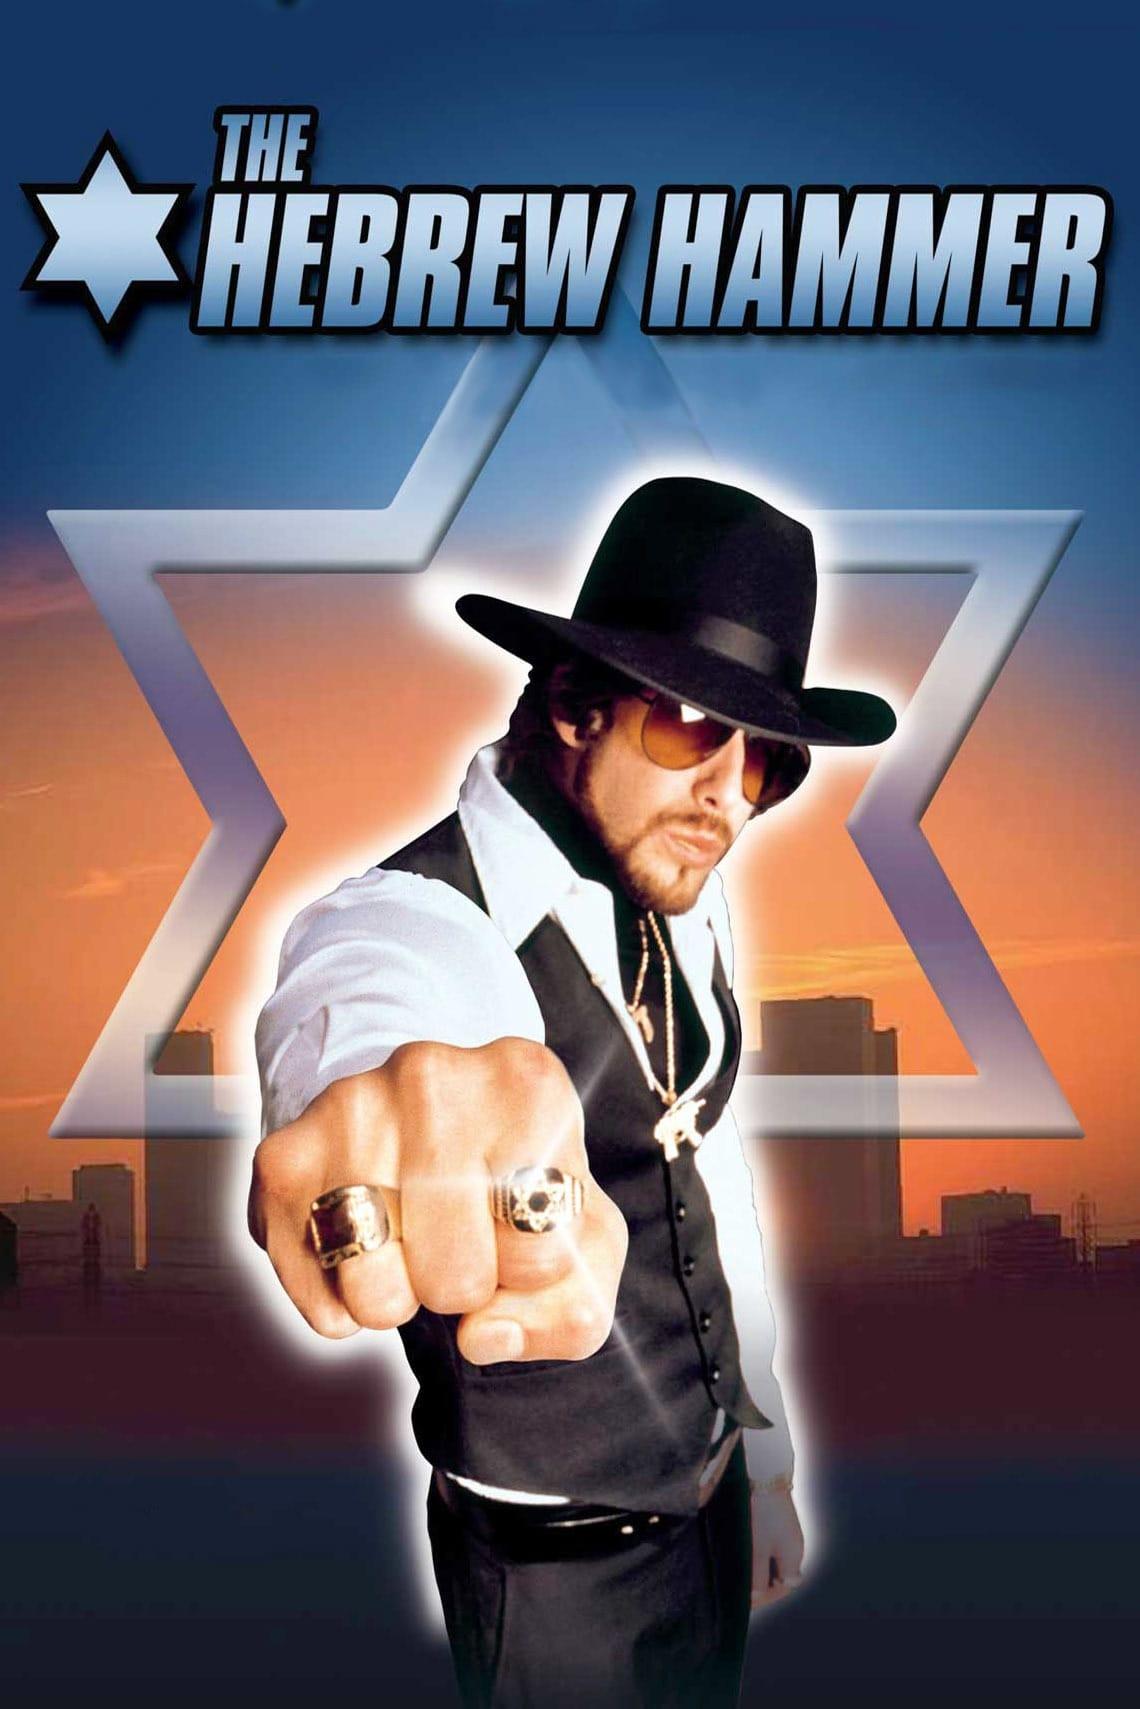 The Hebrew Hammer poster